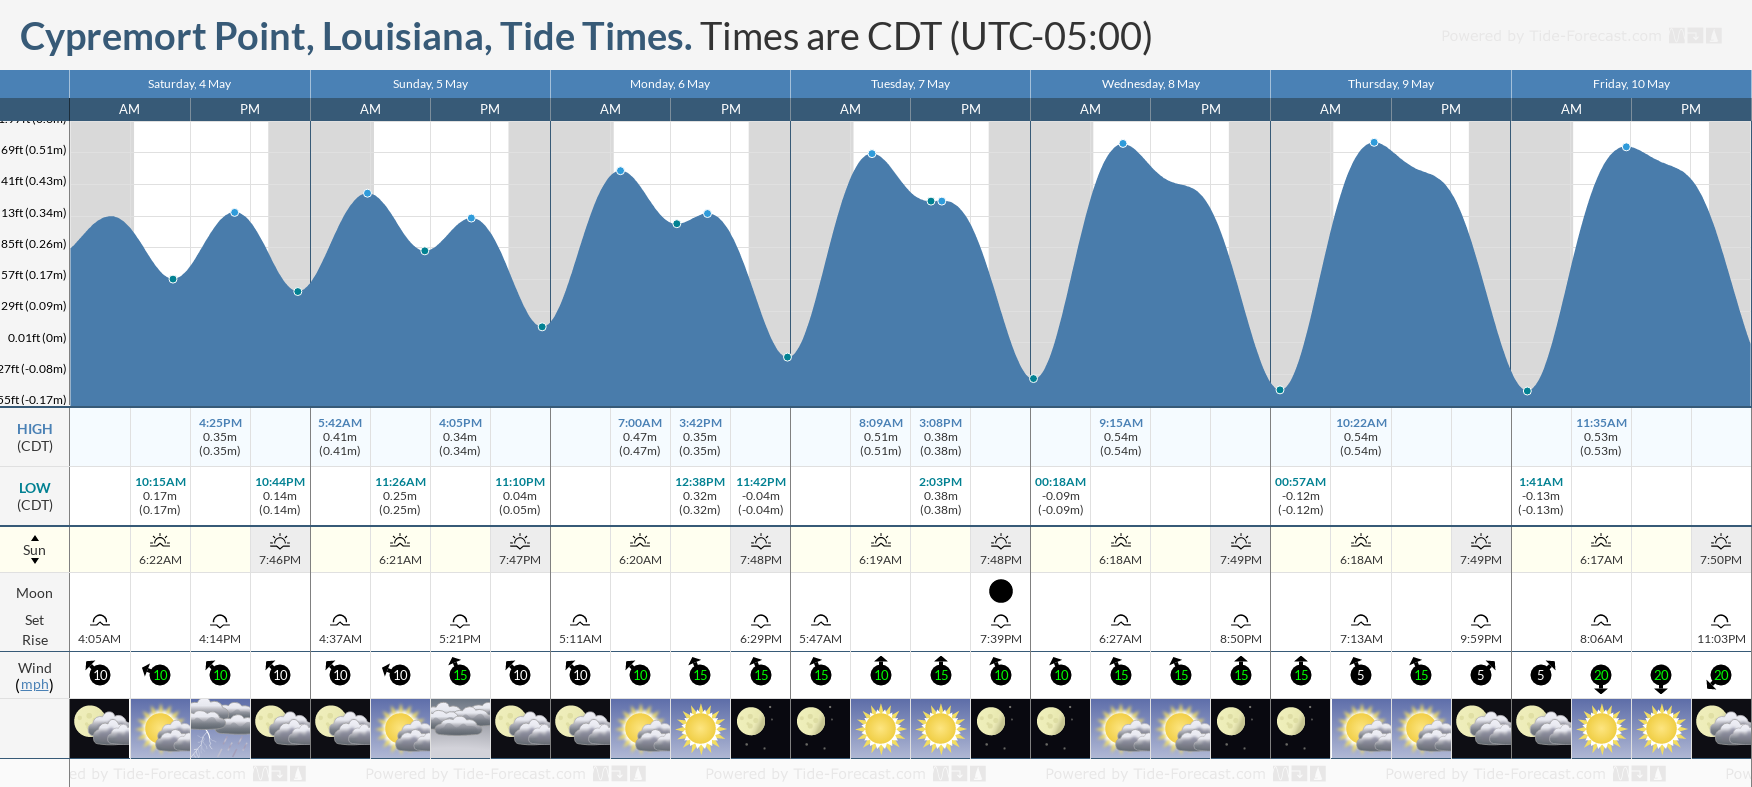 Cypremort Point, Louisiana Tide Chart including high and low tide times for the next 7 days